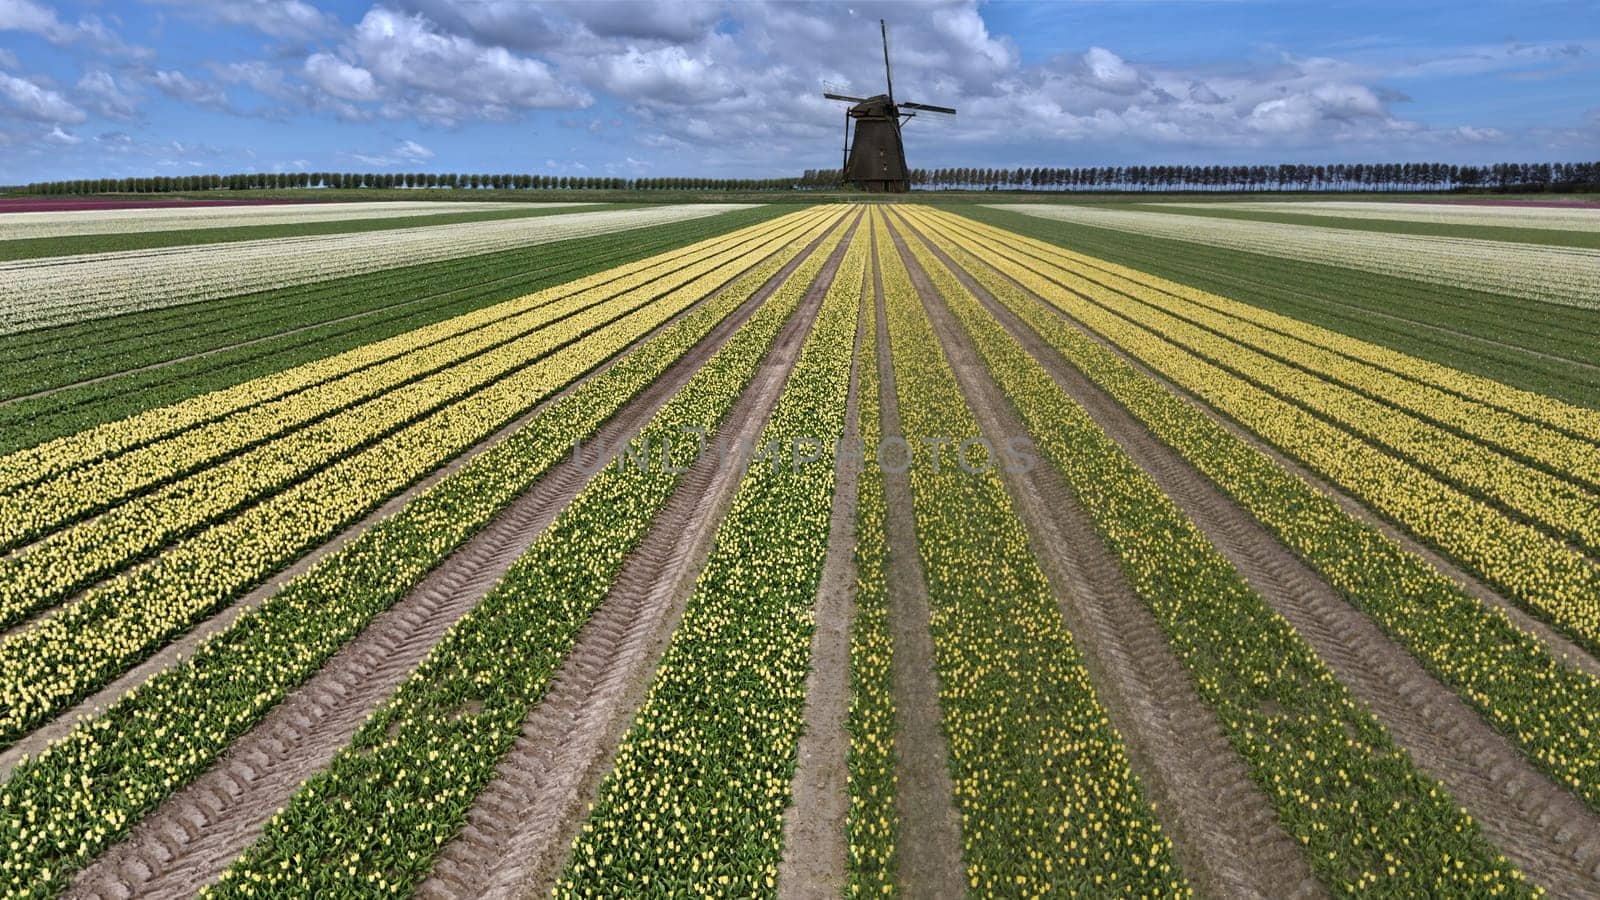 yellow tulip fields in spring in the netherlands dronehoto by compuinfoto